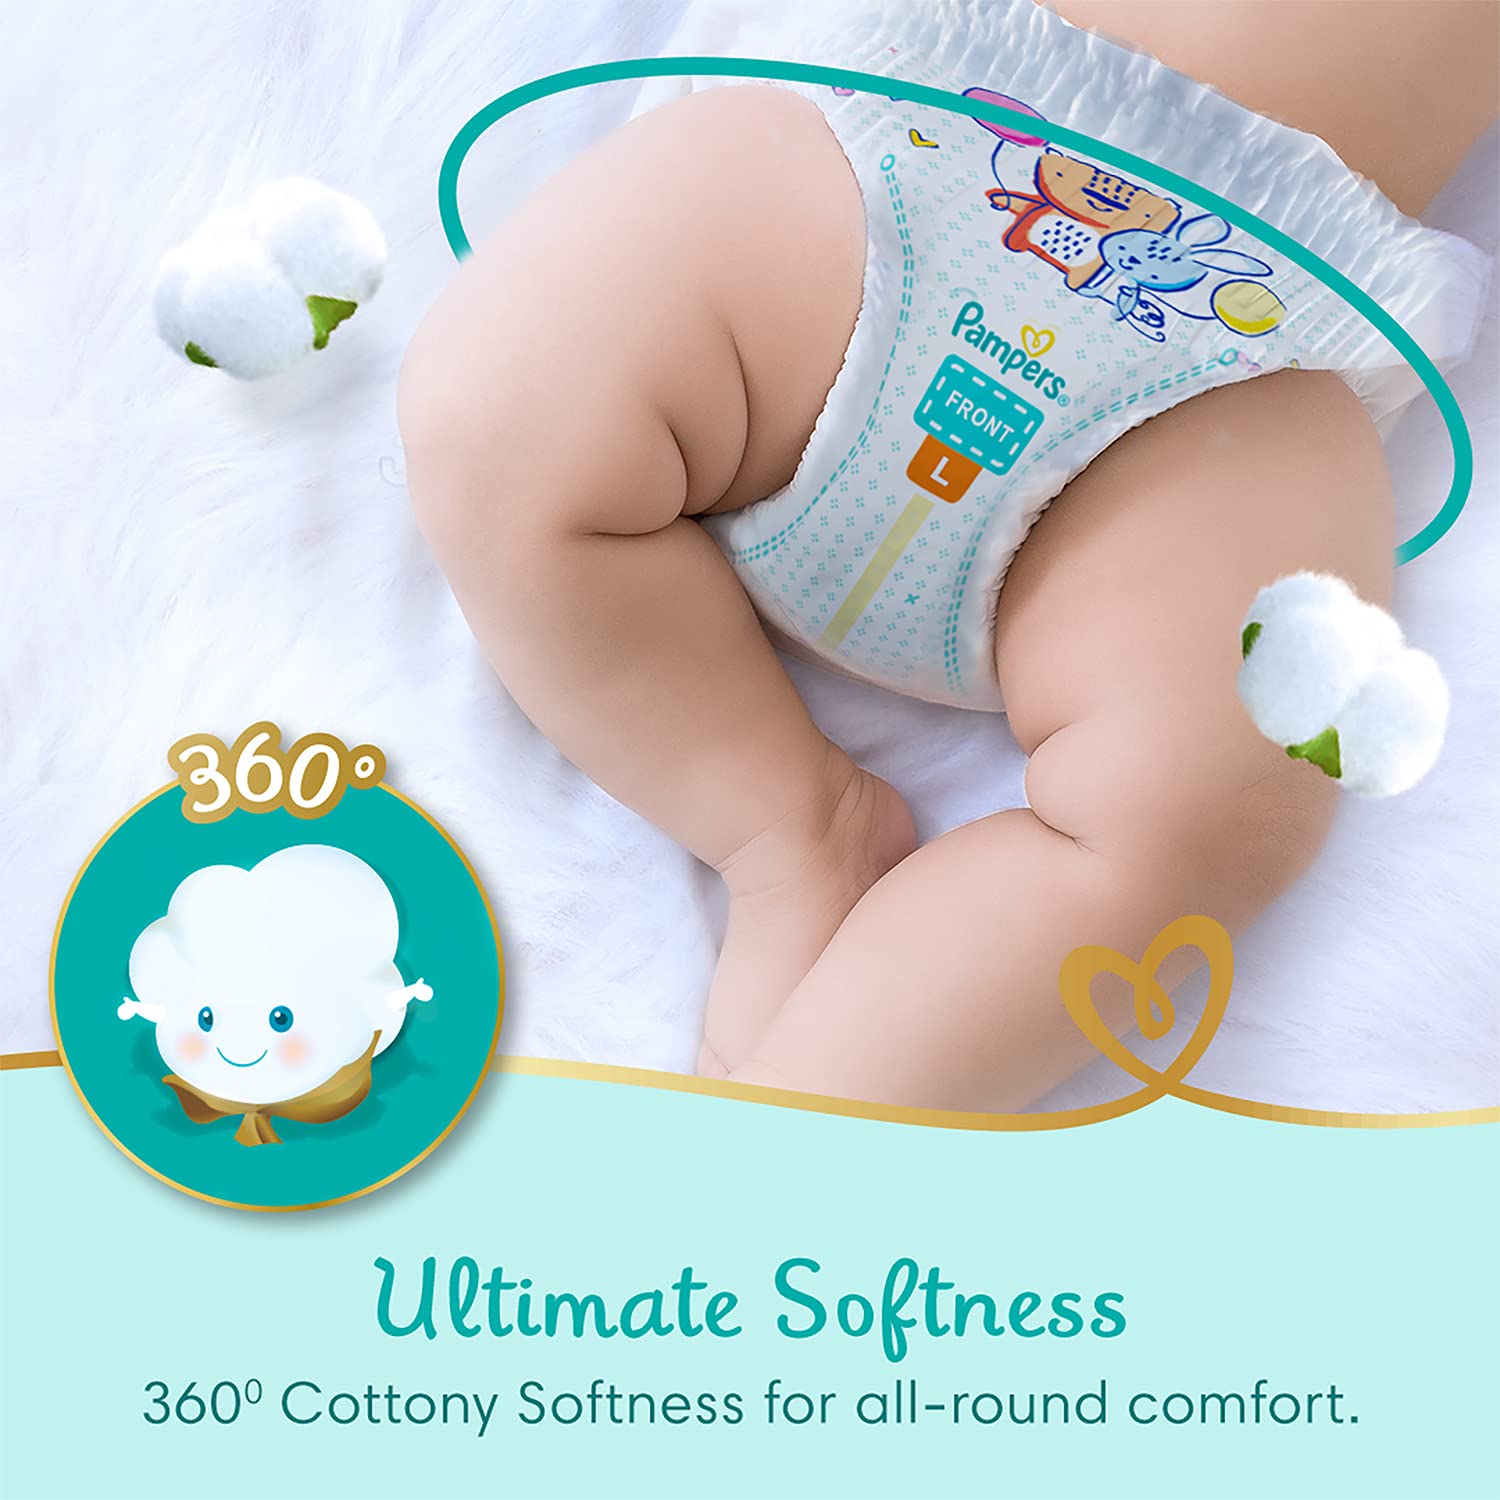 Pampers Premium Care Pants, Double Extra Large size baby diapers (XXL), 30  Count @500 (Usual price 1000+) : r/dealsforindia